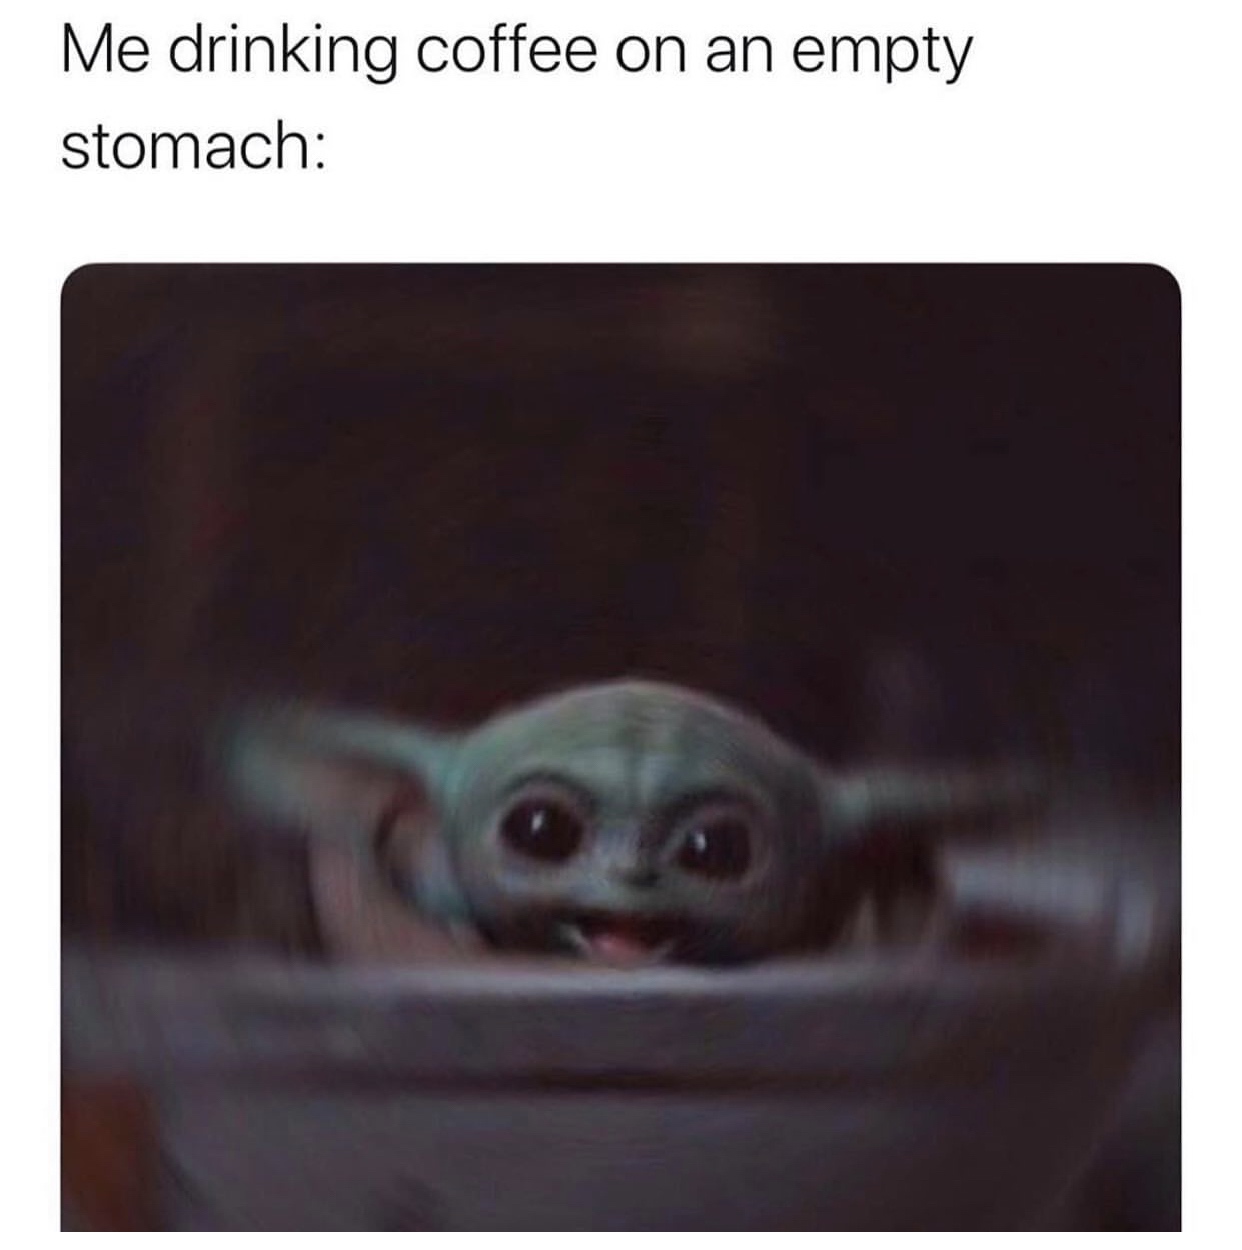 star wars baby yoda memes - Me drinking coffee on an empty stomach